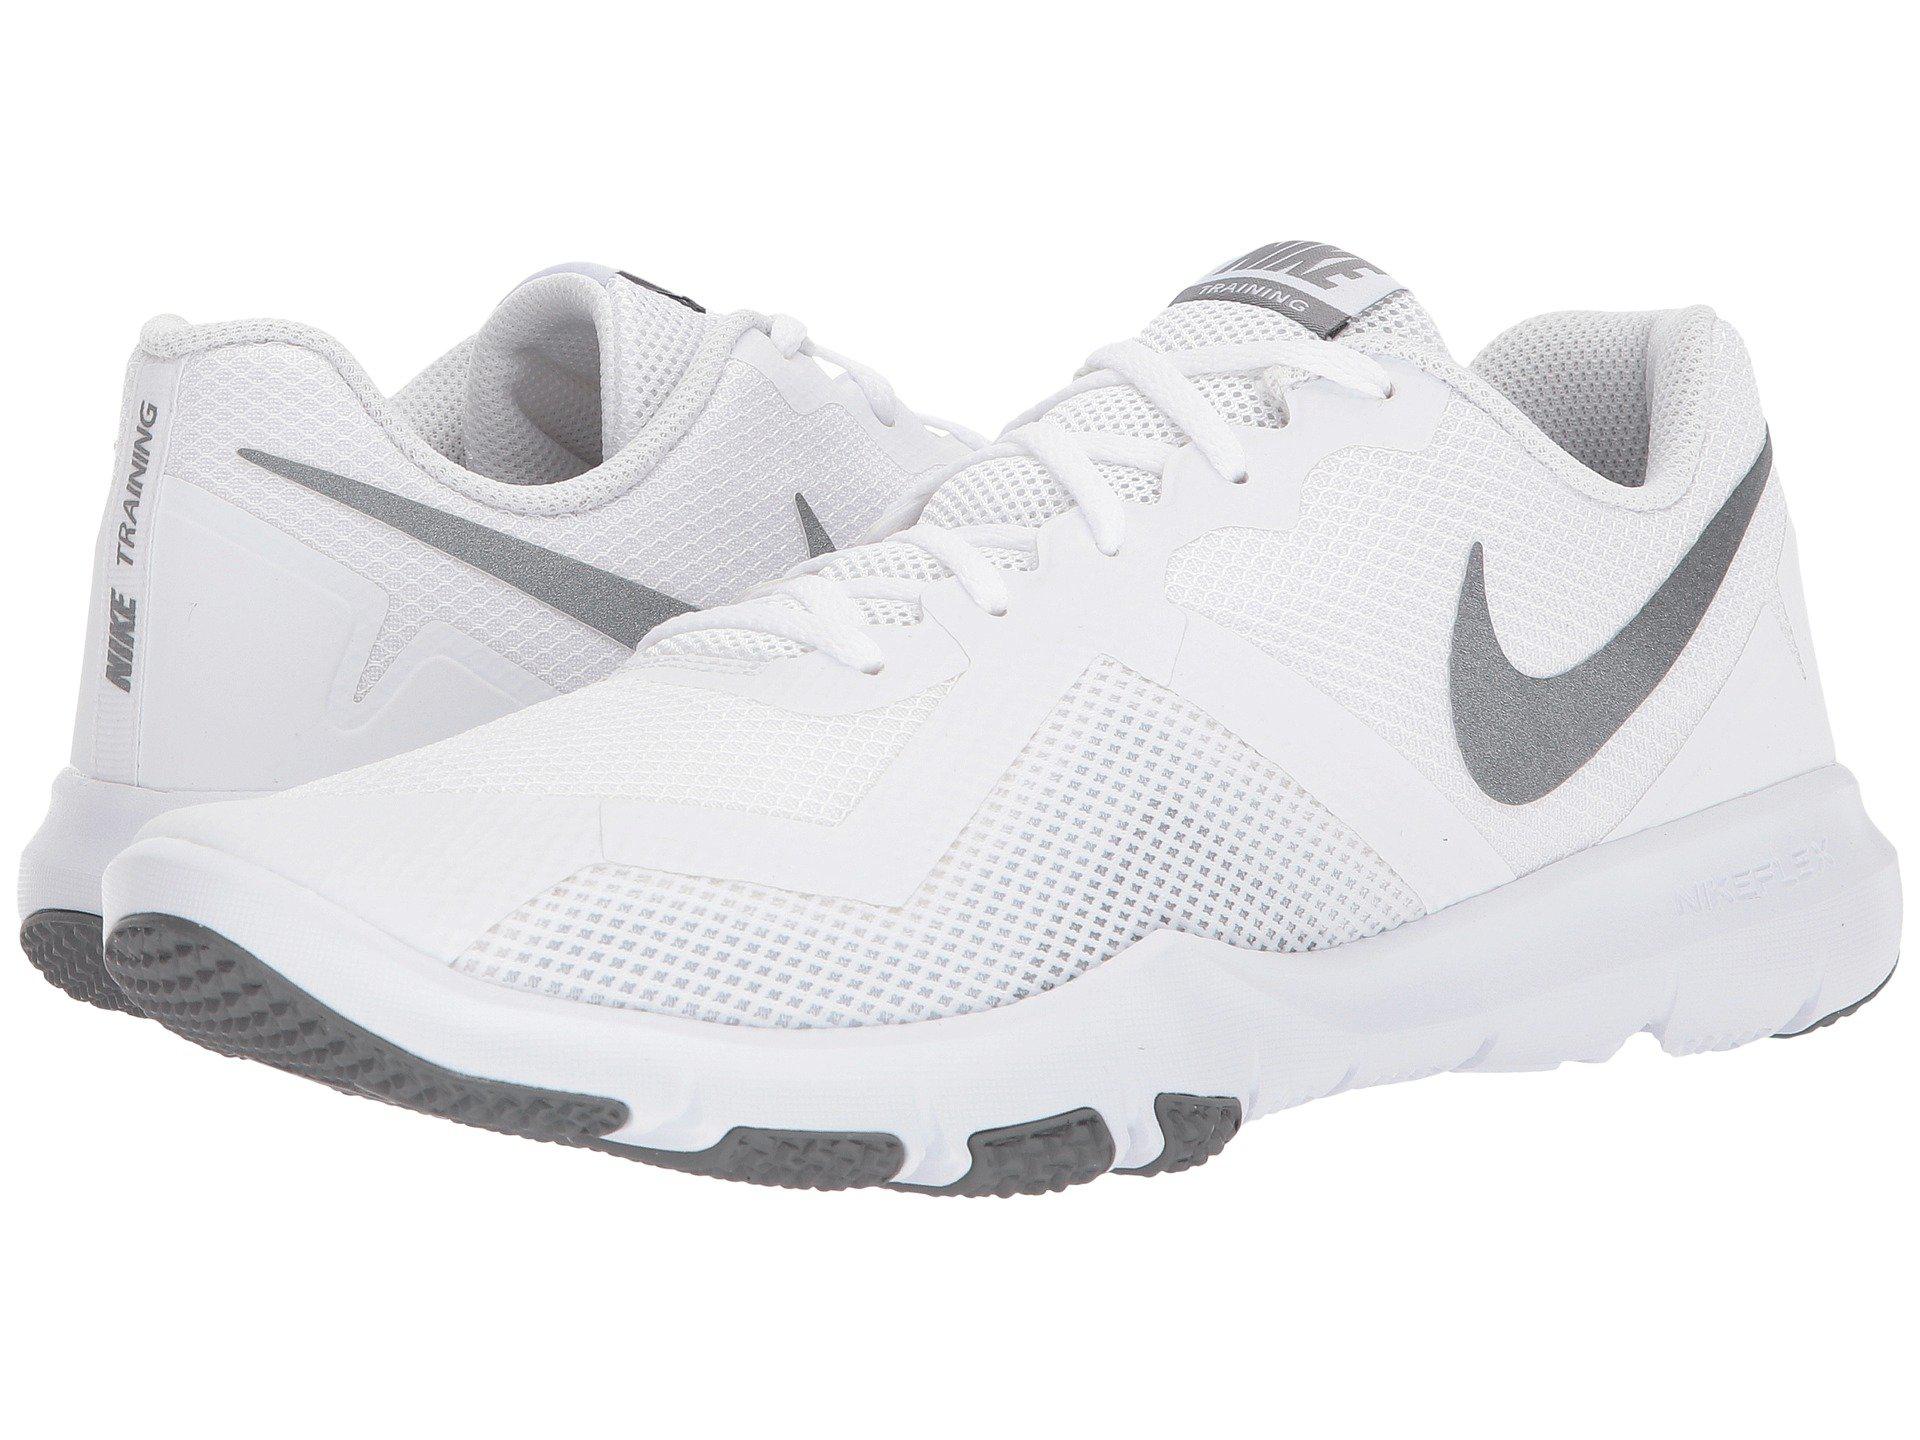 Nike Synthetic Flex Control Ii Training Shoe in White/Metallic Cool  Grey/Cool gr (White) for Men | Lyst